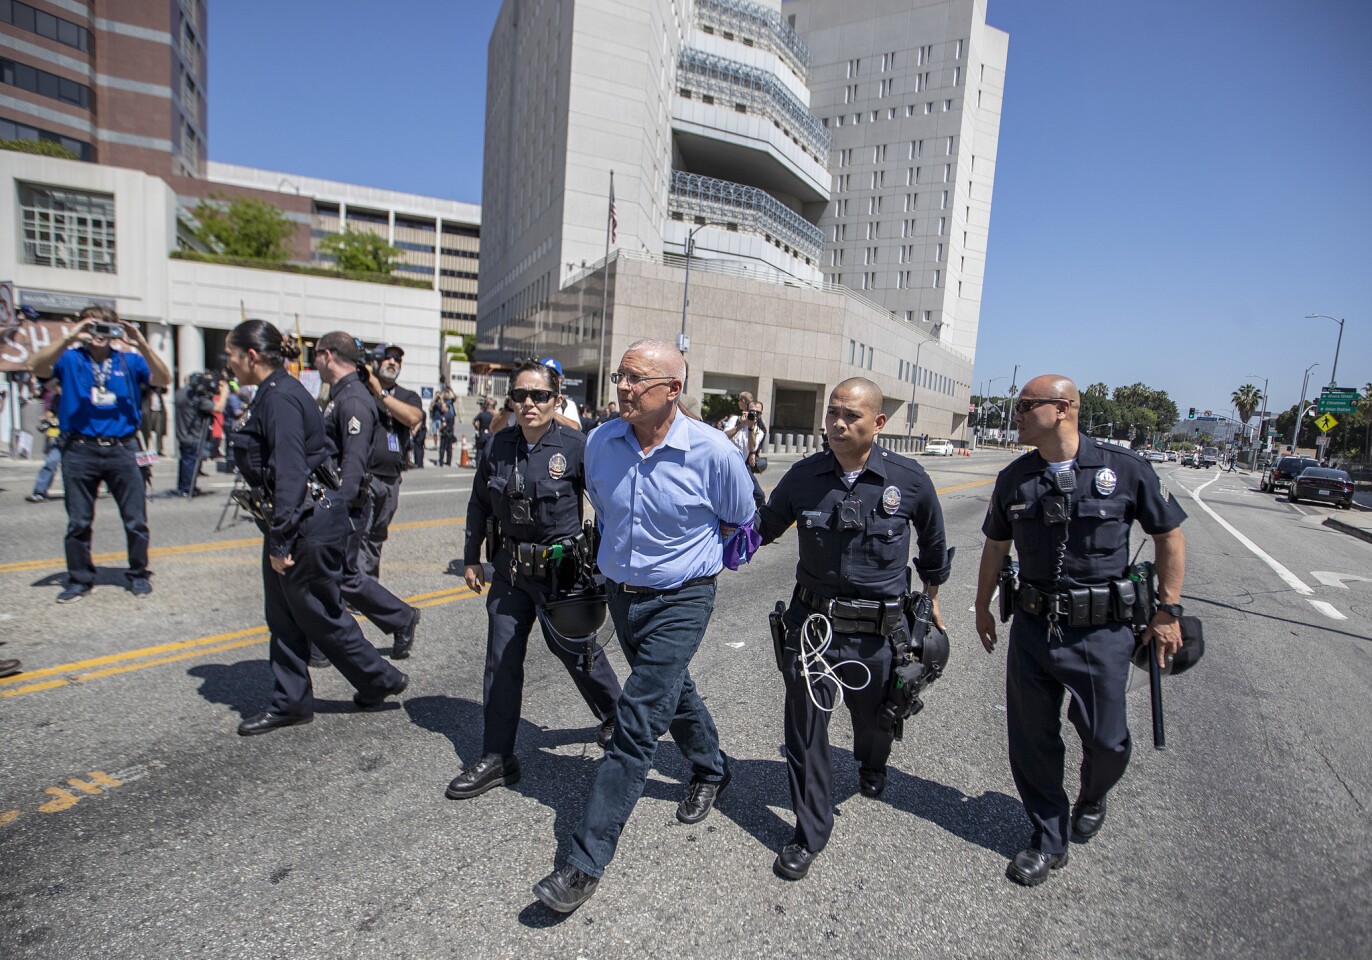 Los Angeles Police Department officers arrest Los Angeles City Councilman Mike Bonin along with more than a dozen other protesters who blocked the entrance to the Metropolitan Detention Center in Los Angeles on Monday.